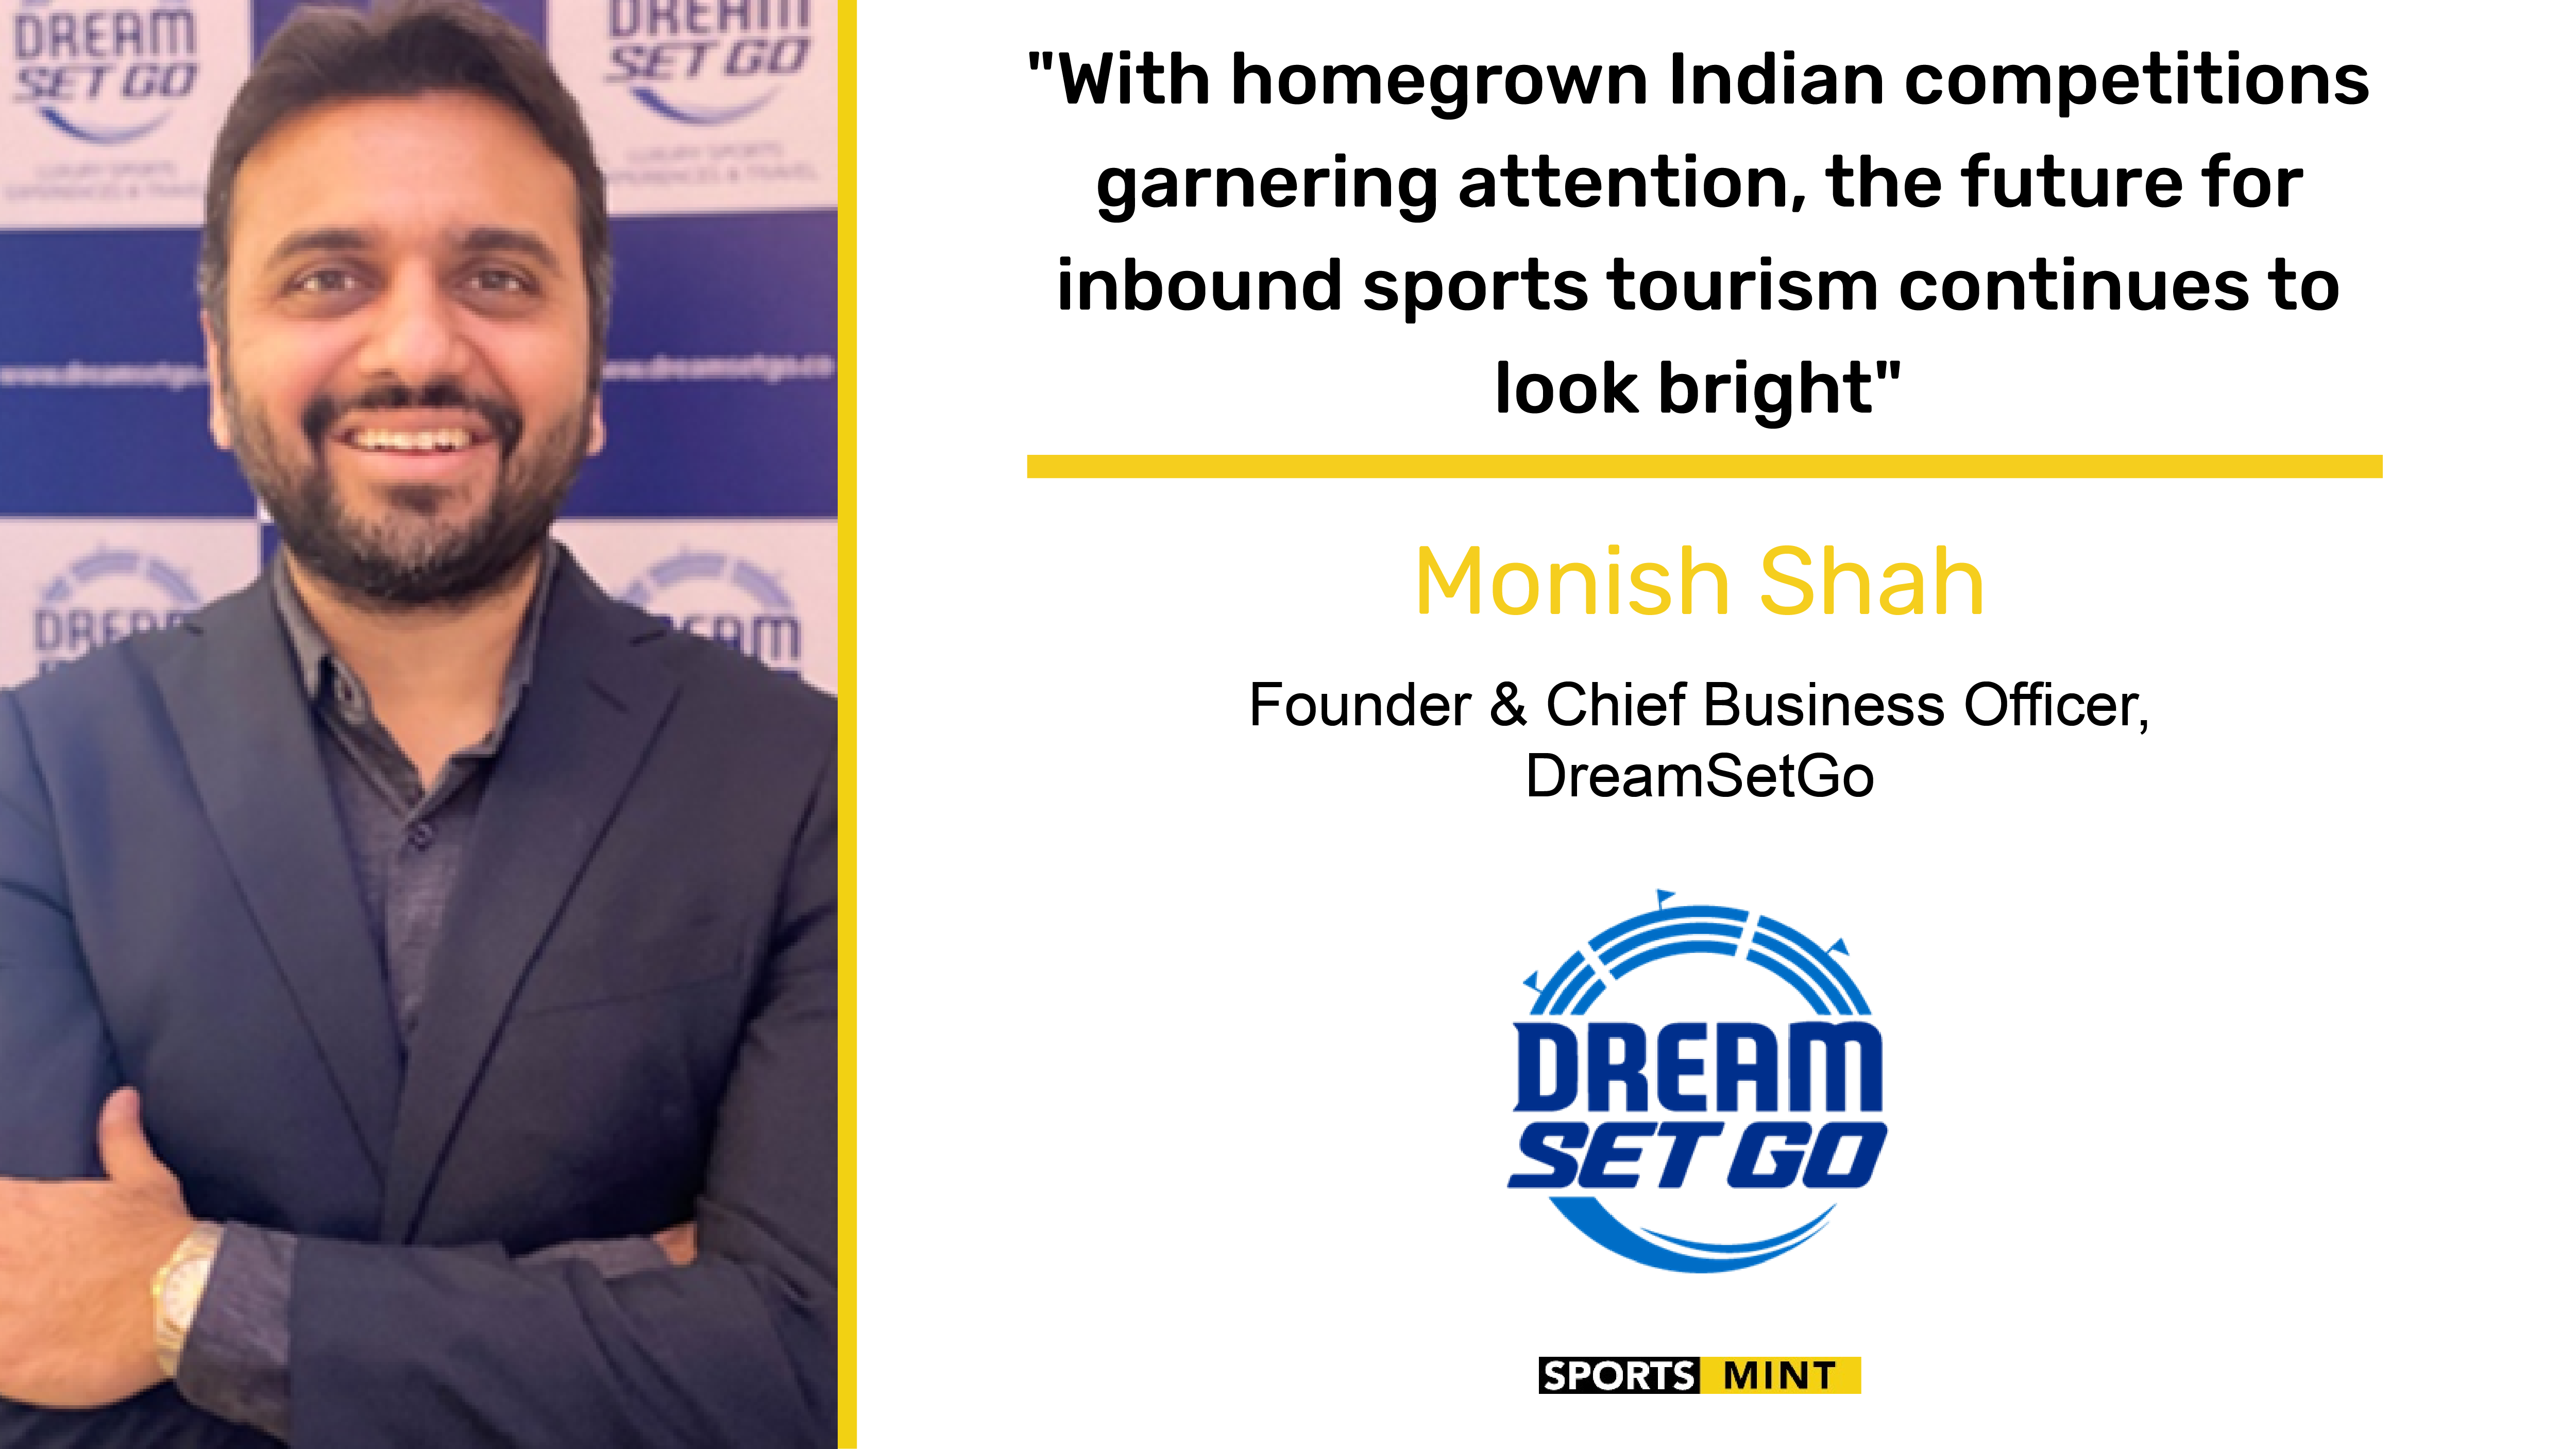 Exclusive: With homegrown Indian competitions garnering attention, the future for inbound sports tourism continues to look bright - Monish Shah, Founder & Chief Business Officer, DreamSetGo